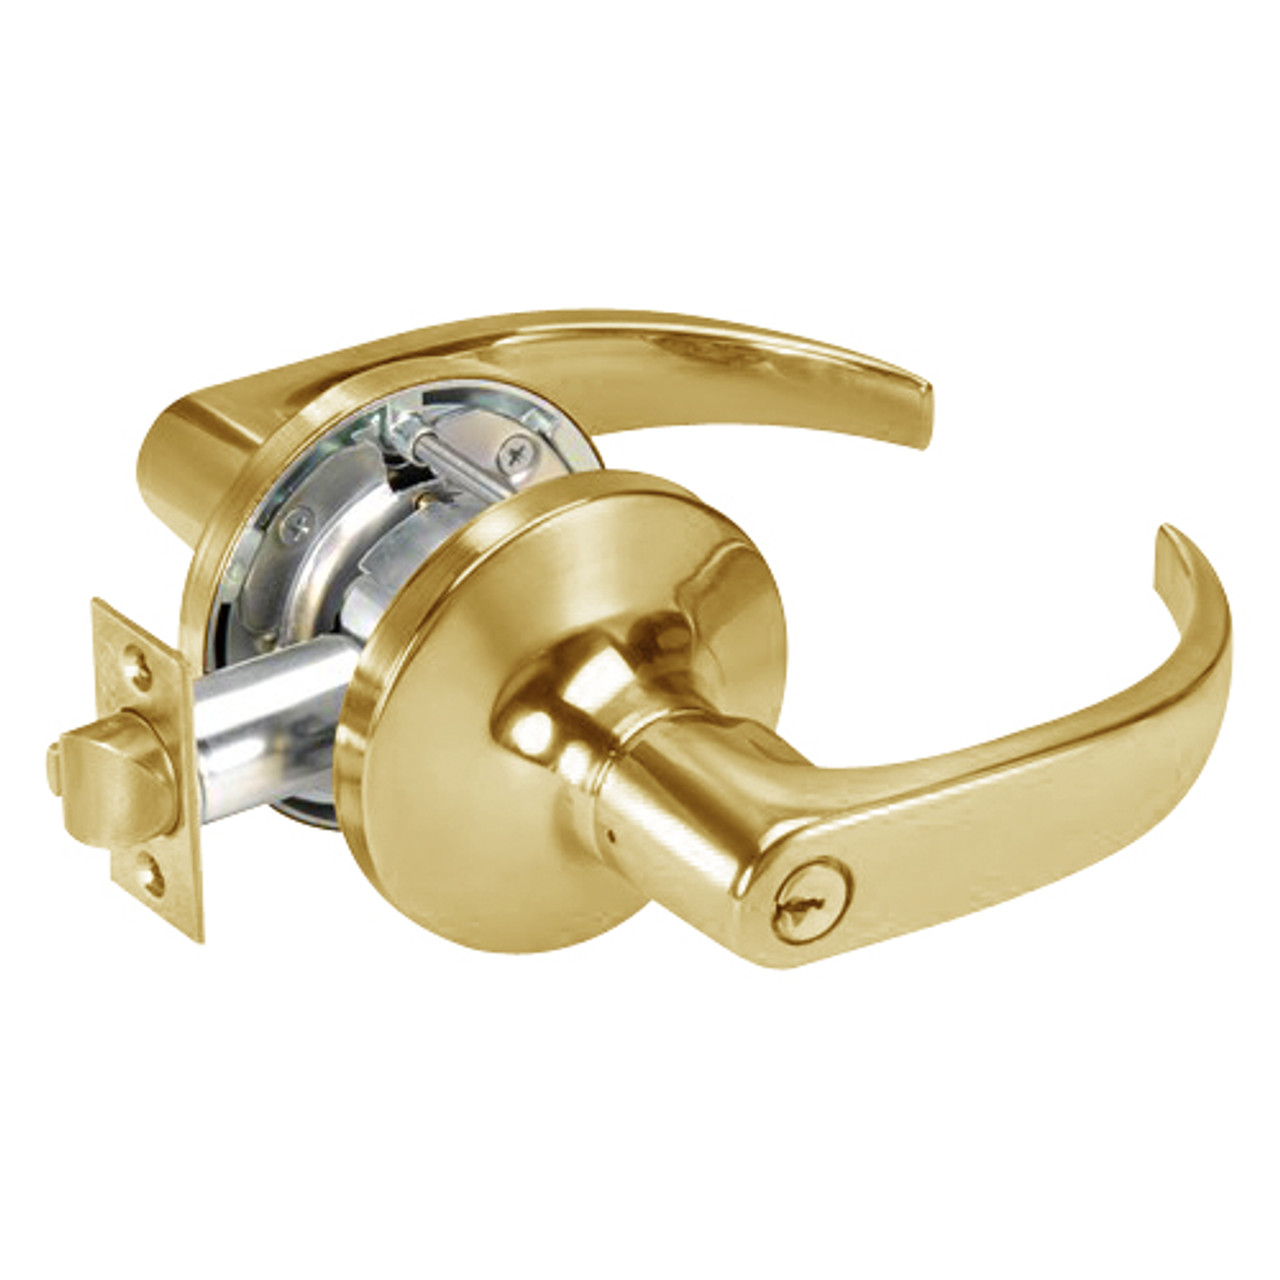 PB5407LN-606 Yale 5400LN Series Single Cylinder Entry Cylindrical Lock with Pacific Beach Lever in Satin Brass